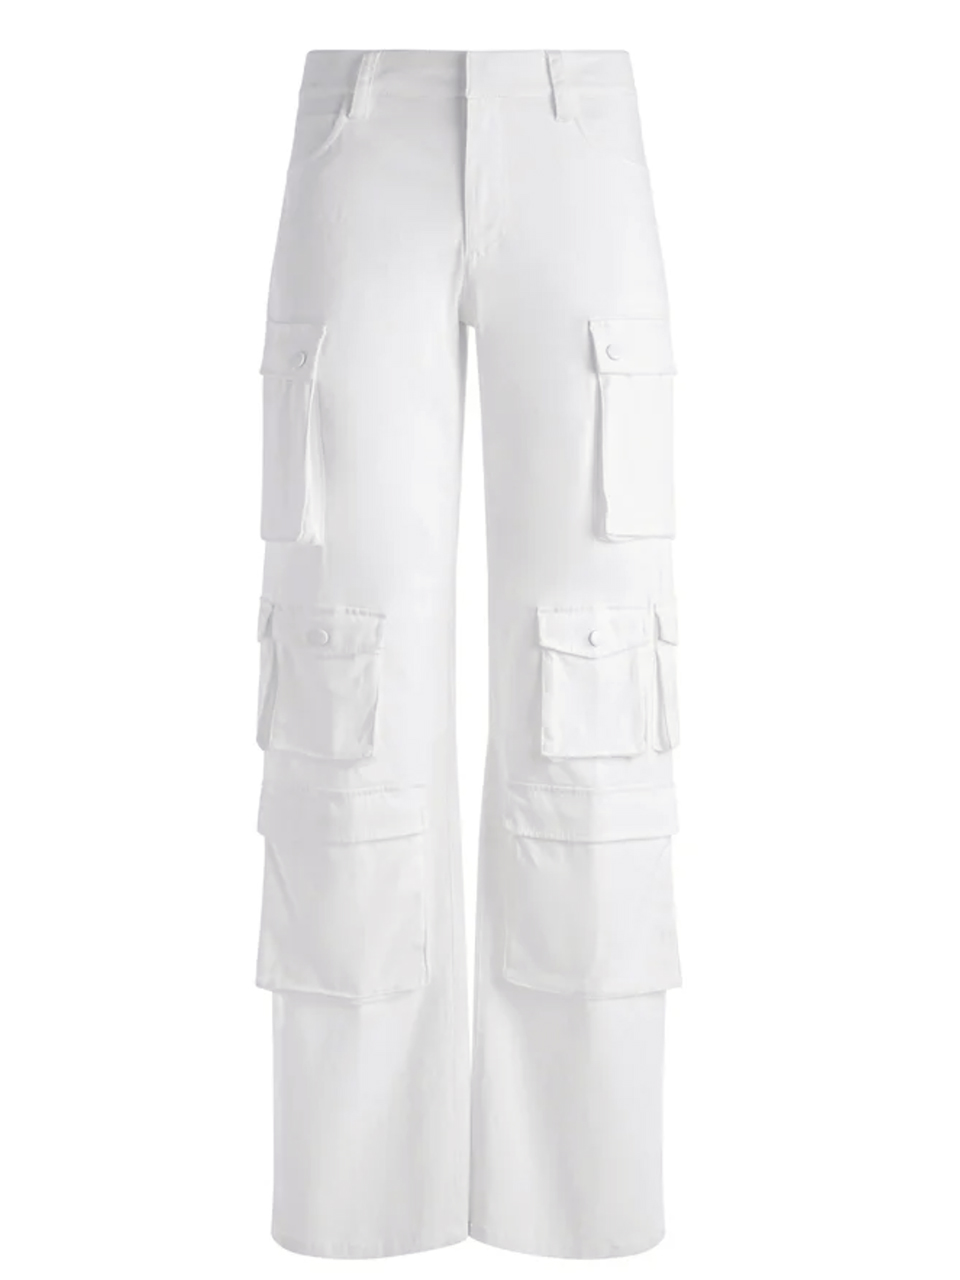 ALICE + OLIVIA Olympia Baggy Cargo Pant in Off White Product Shot 